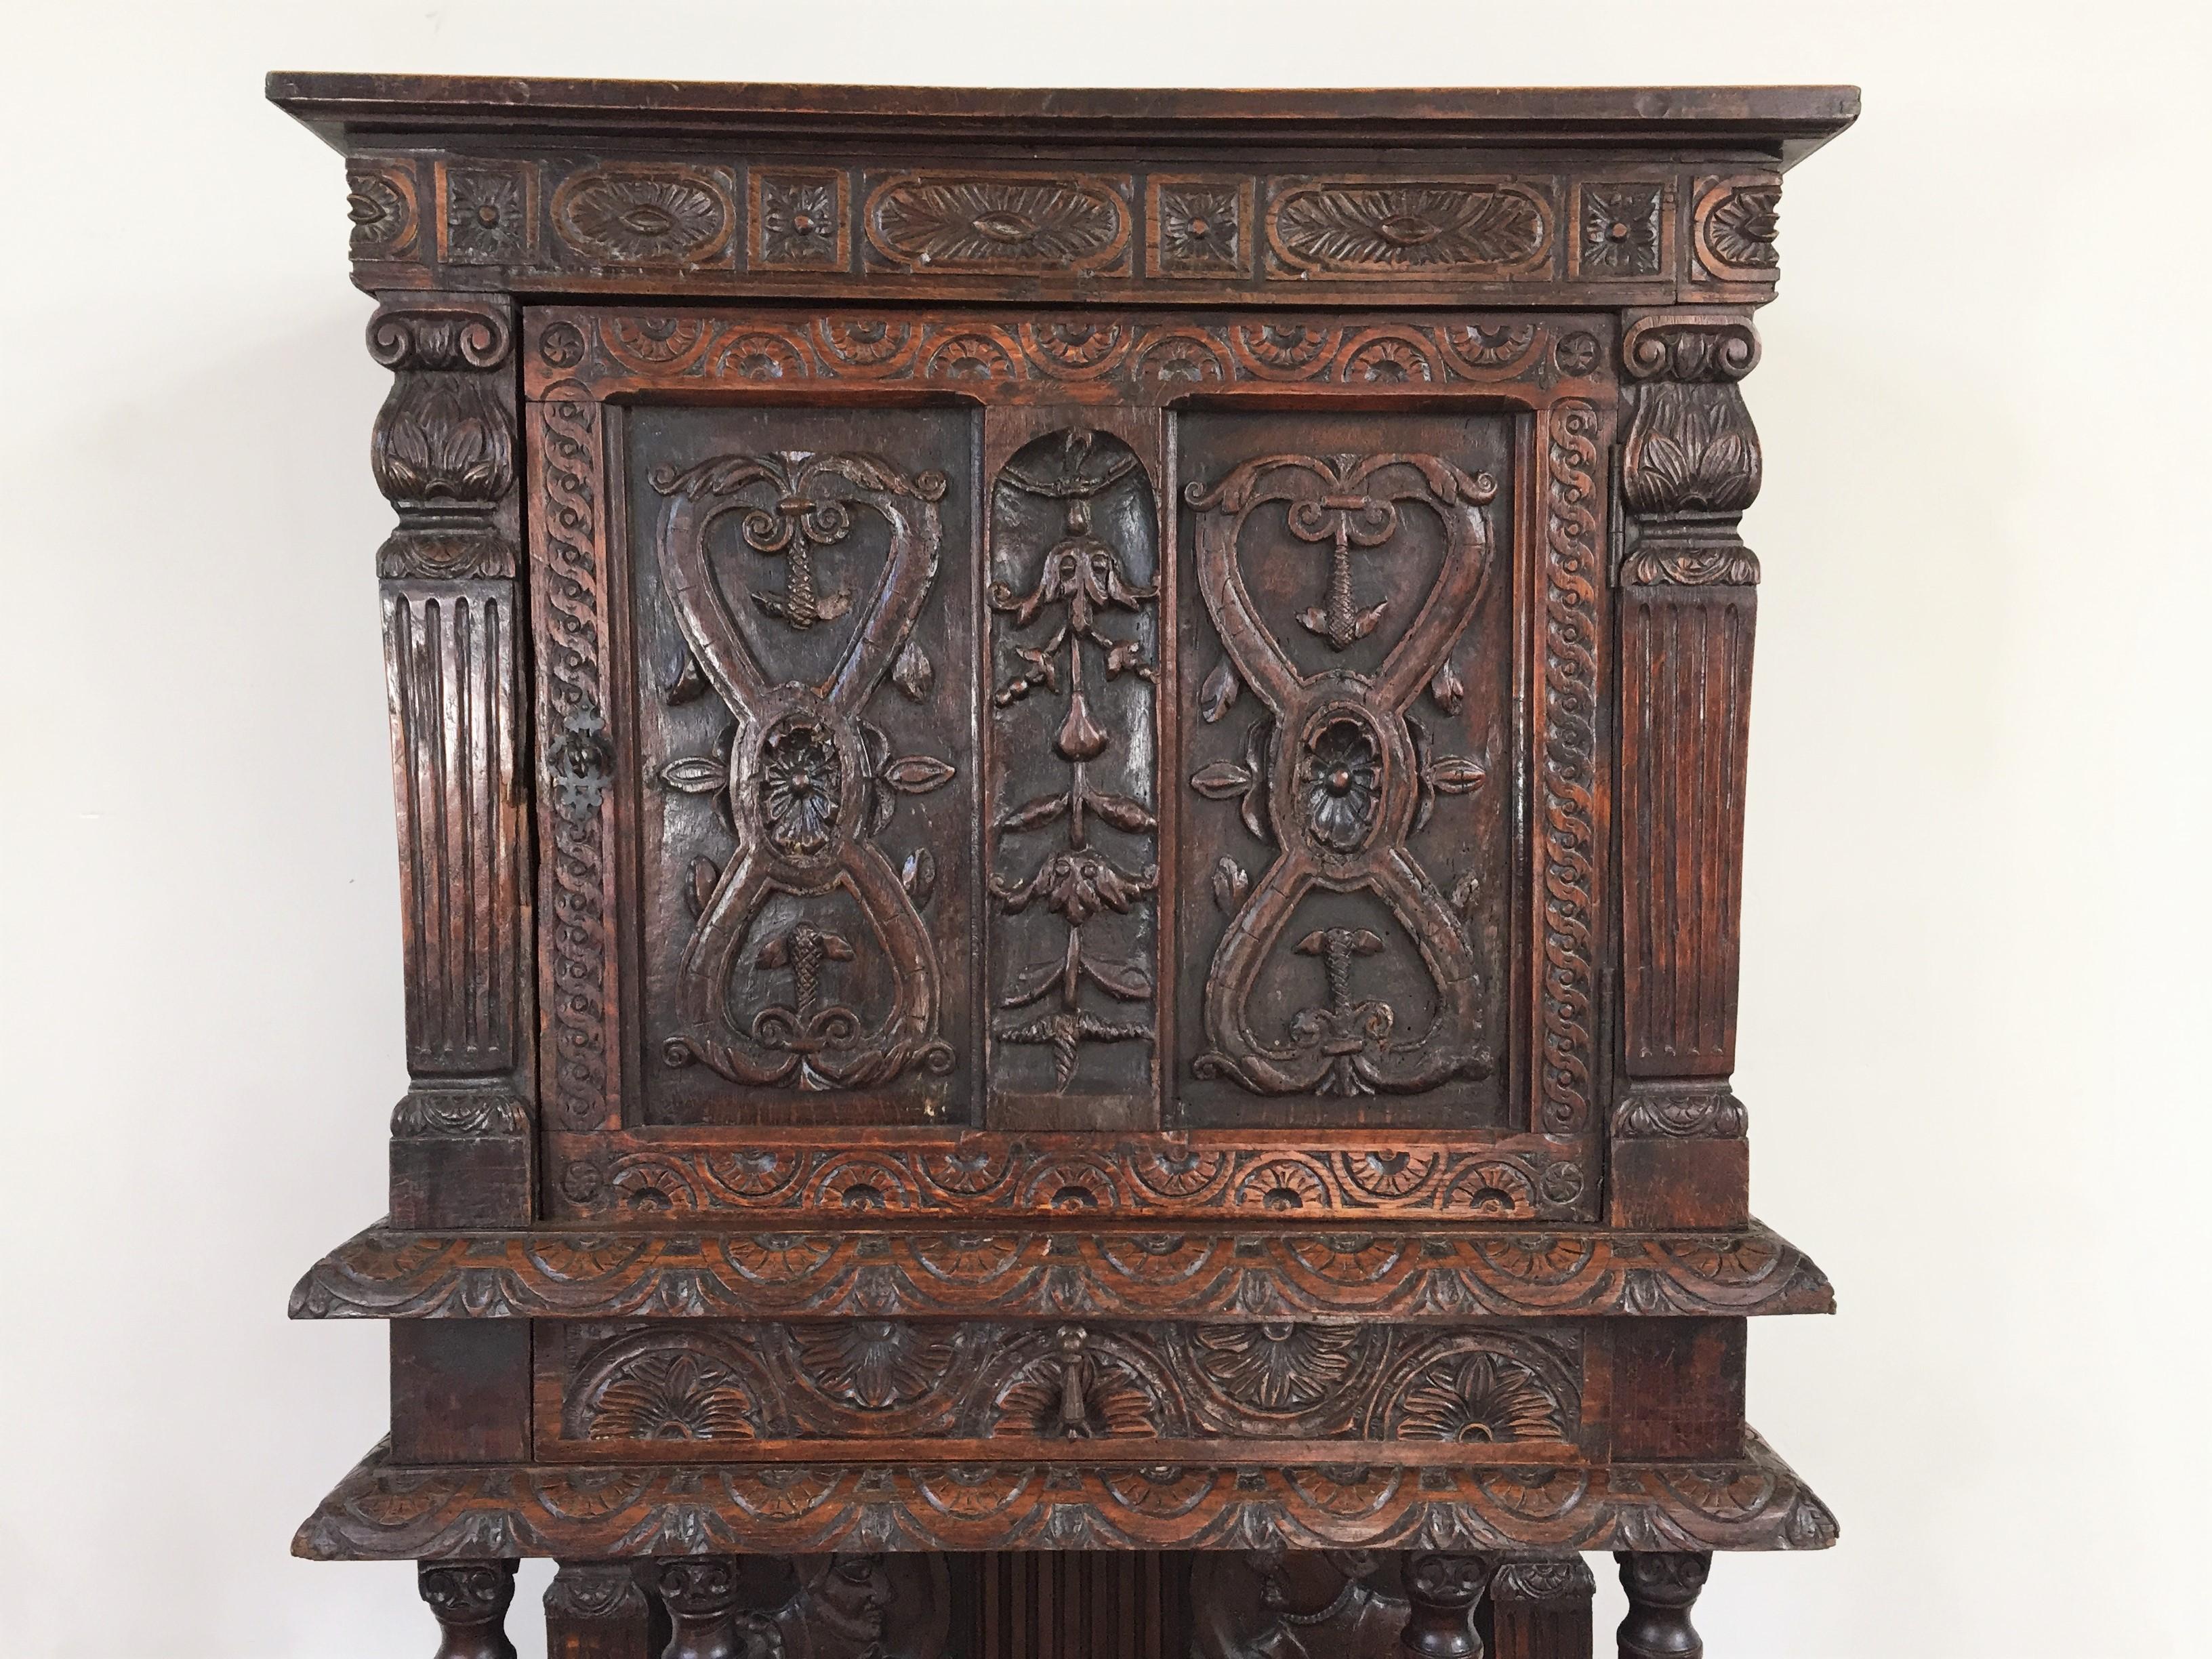 Beautiful carved credence cabinet opening at the top with a door and a drawer, with floral decoration and fluted pilasters, supported at the bottom by four fluted columns with Ionic capitals with a paneled background representing